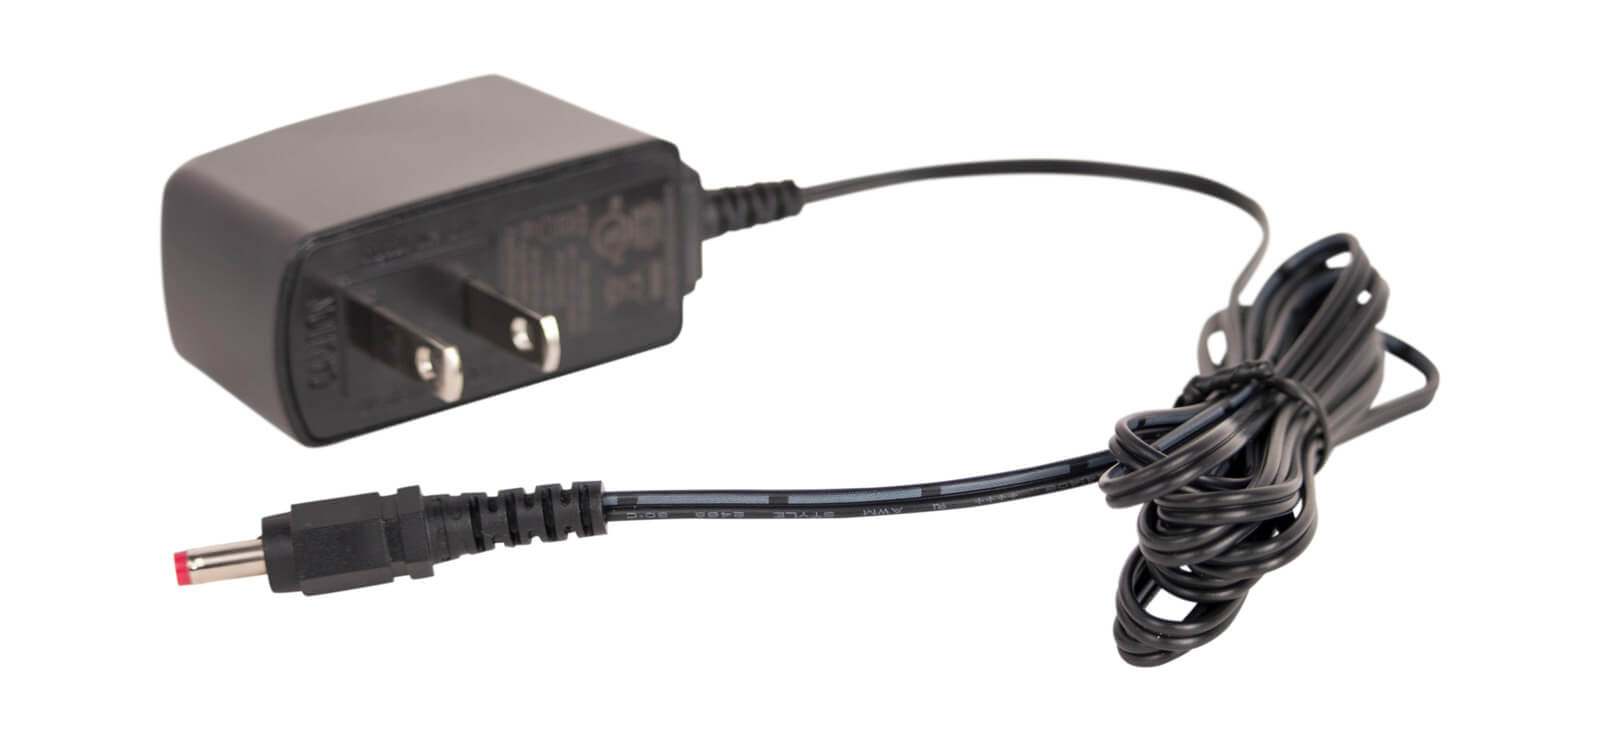 Home power adapter for use with the Sirius XM Radio Bluetooth Dock